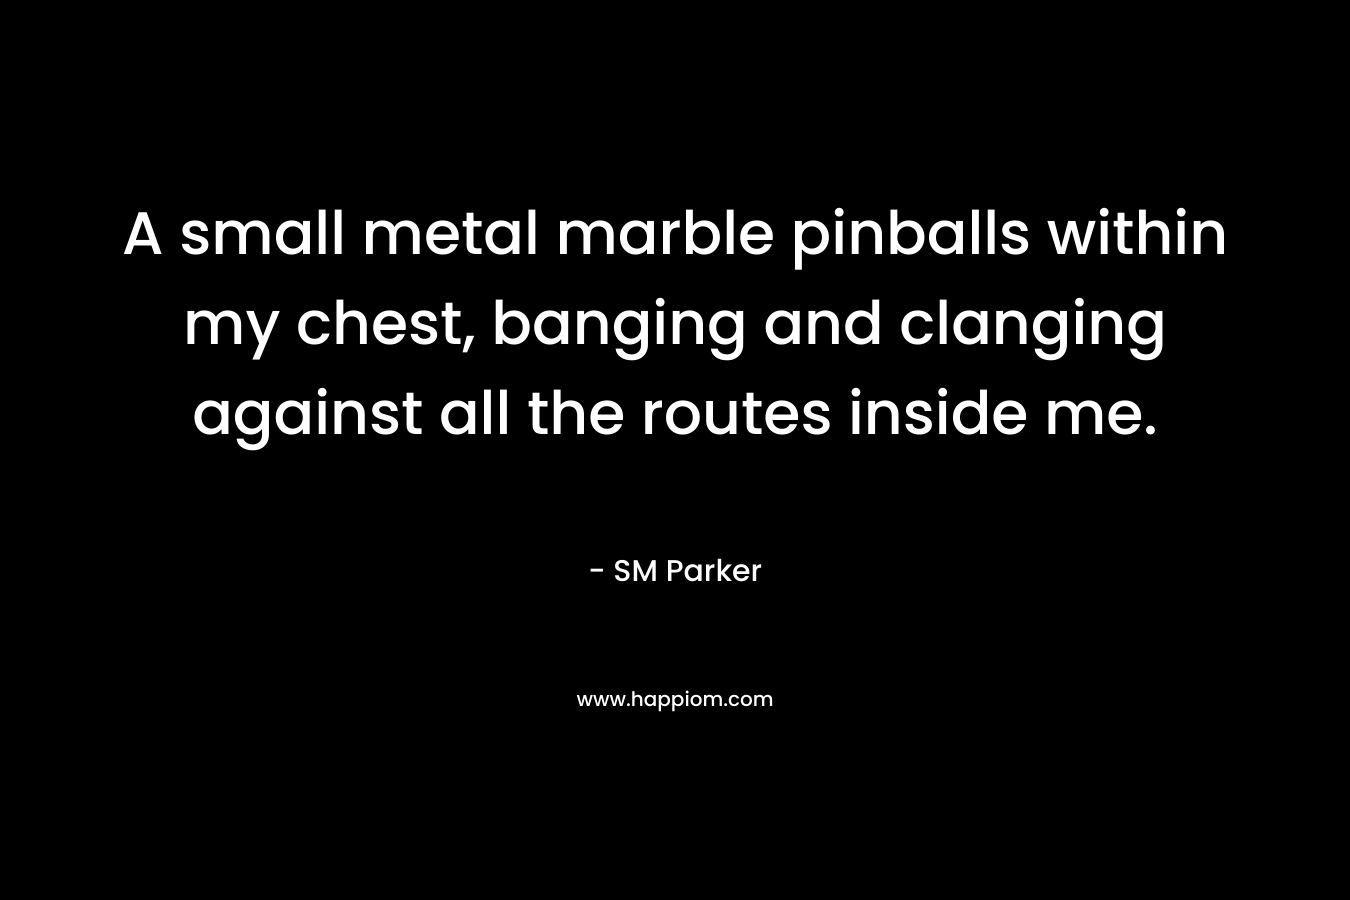 A small metal marble pinballs within my chest, banging and clanging against all the routes inside me. – SM Parker